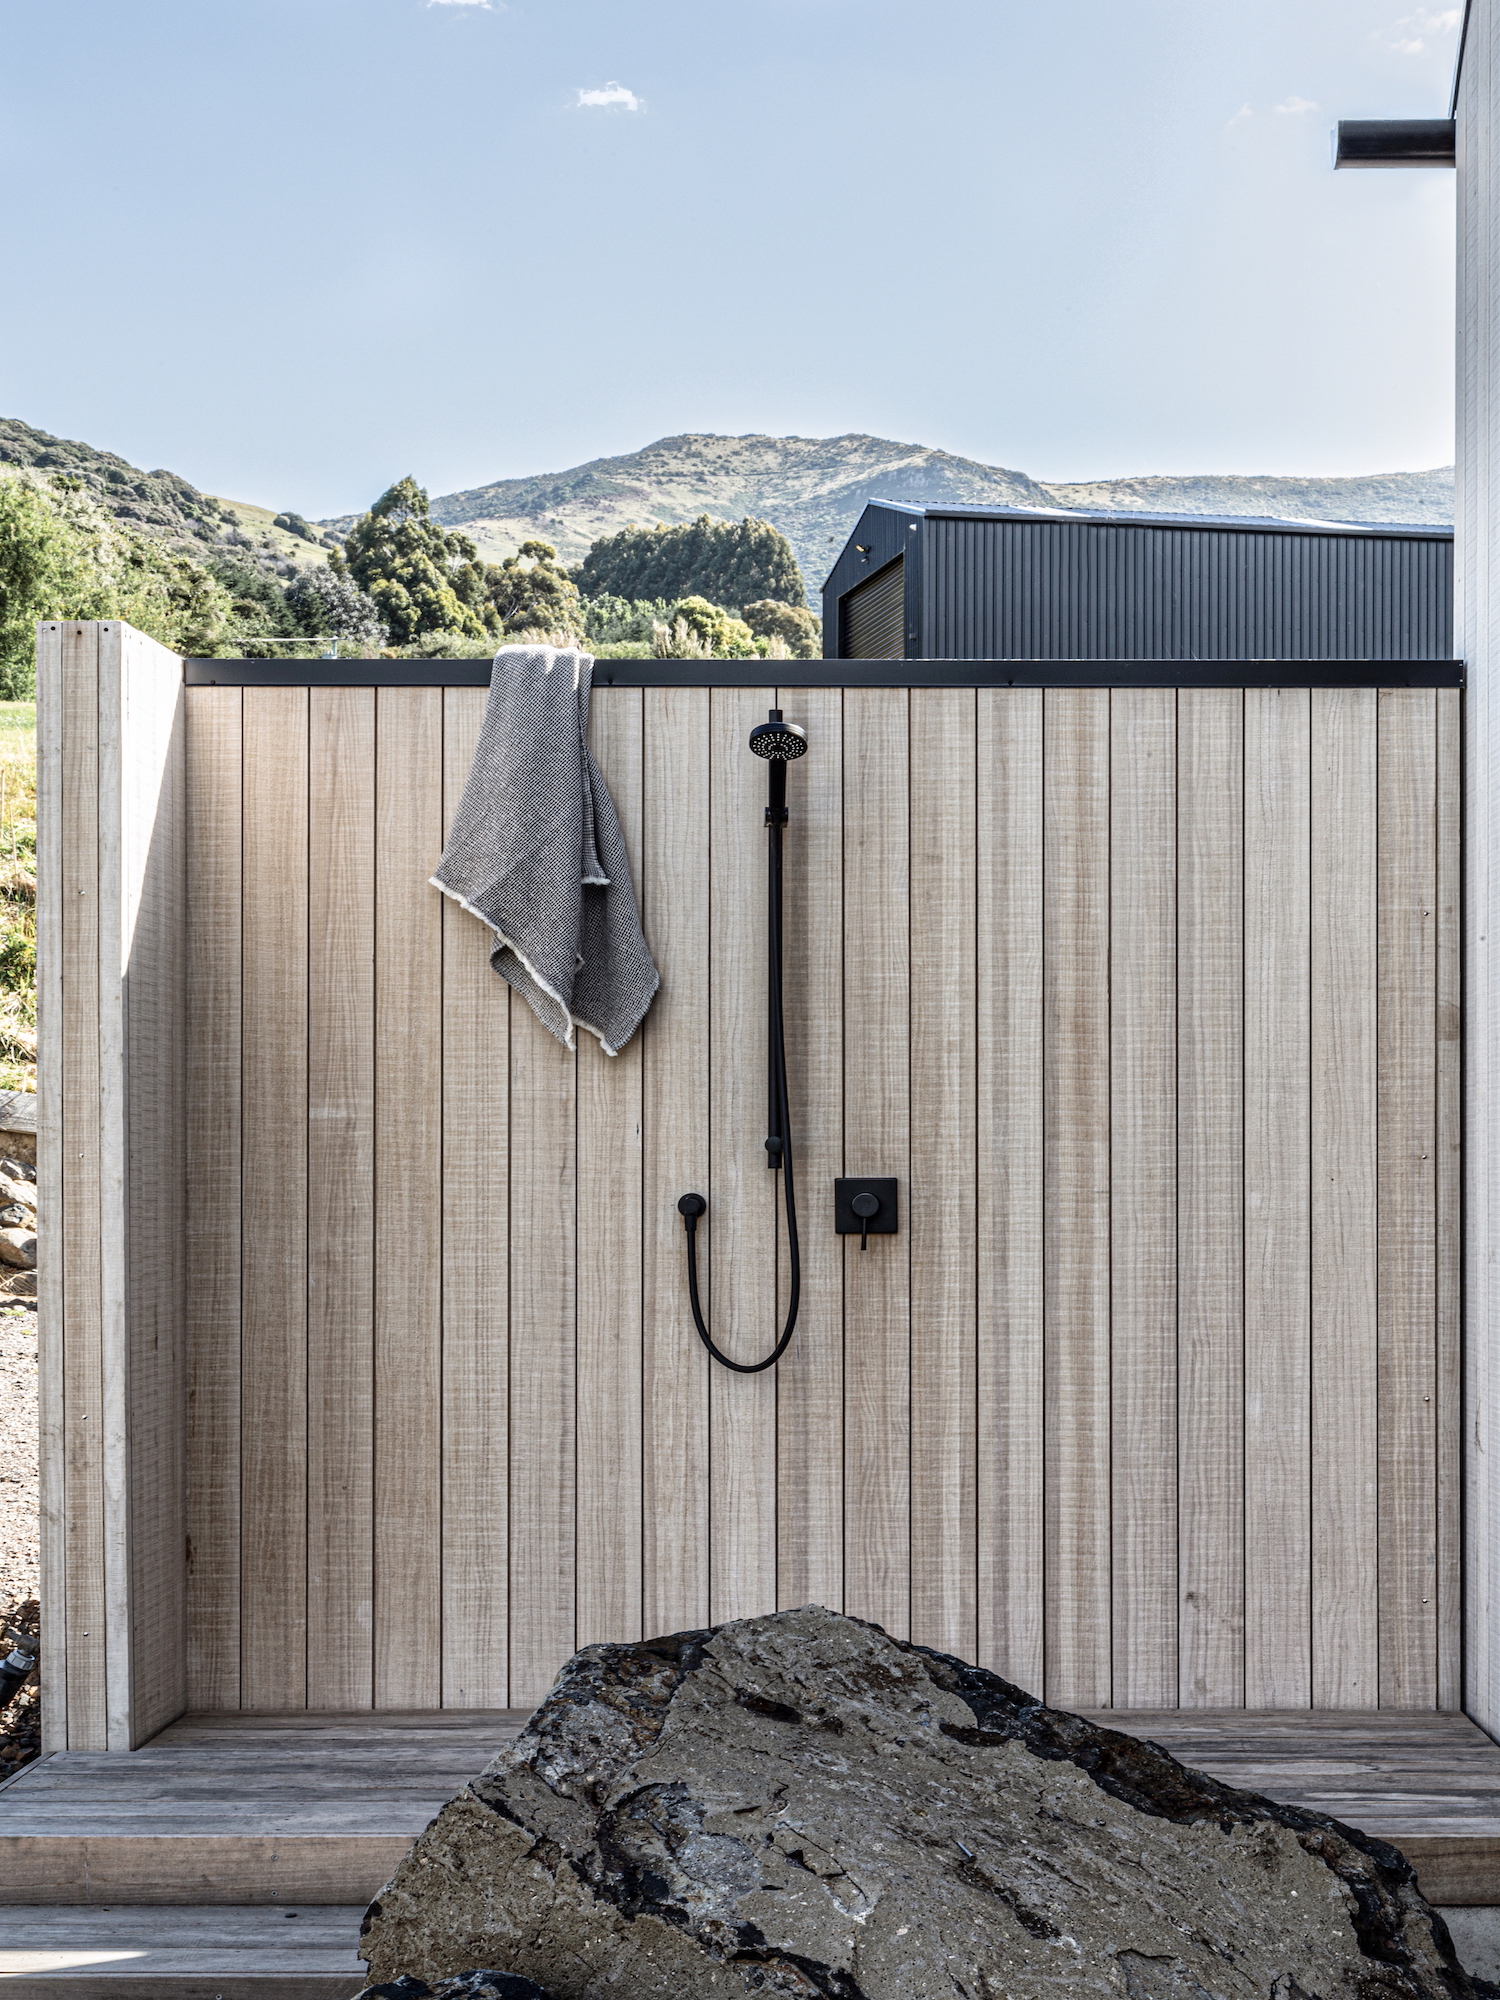 Last, but definitely not least, this outdoor shower in New Zealand shows that you can get clean with a view. #backyard inspiration via www.L-2-Design.com